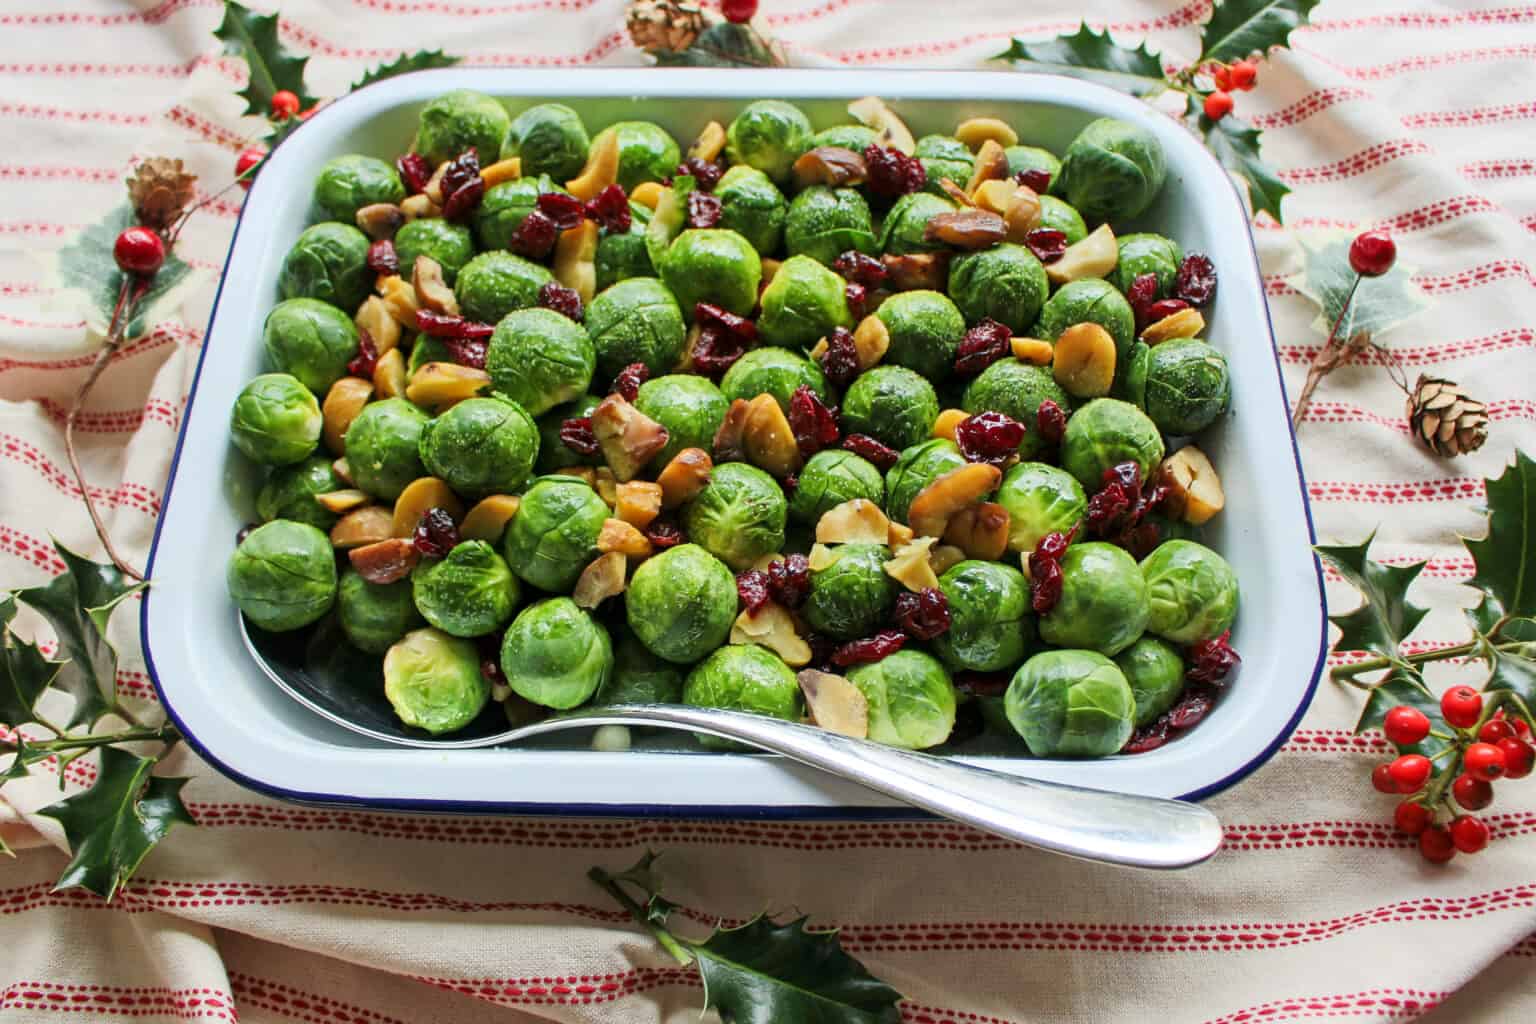 The Best Festive Vegan Brussel Sprouts Recipe You've Ever Had!